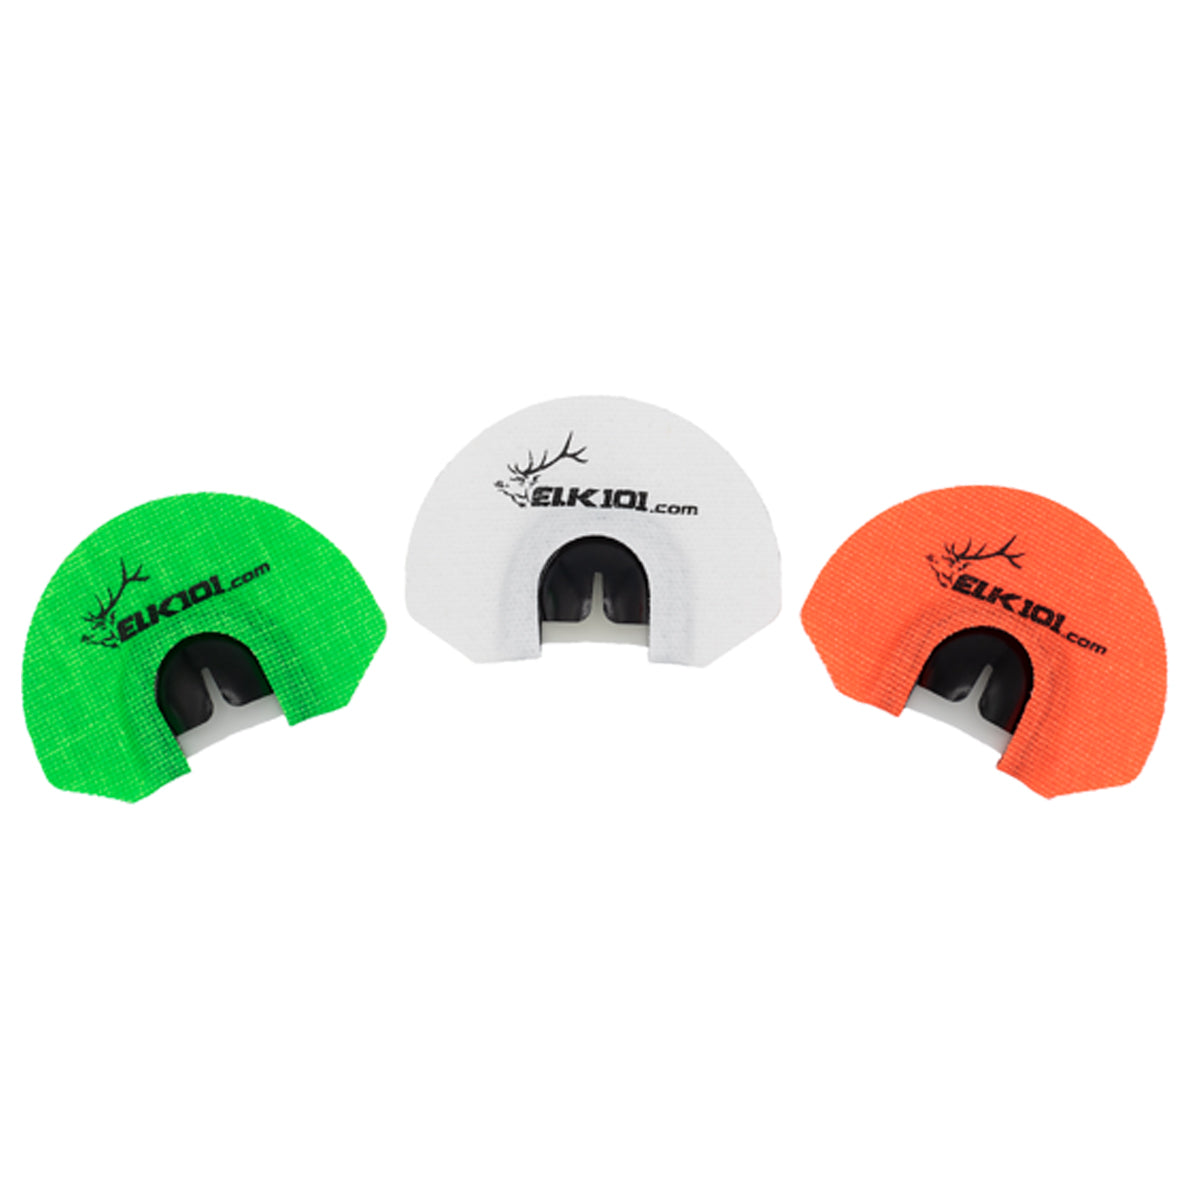 Rocky Mountain Hunting Calls Elk101 Signature Series 2.0 Diaphragm Elk Calls - 3 pack in  by GOHUNT | Rocky Mountain Hunting Calls - GOHUNT Shop